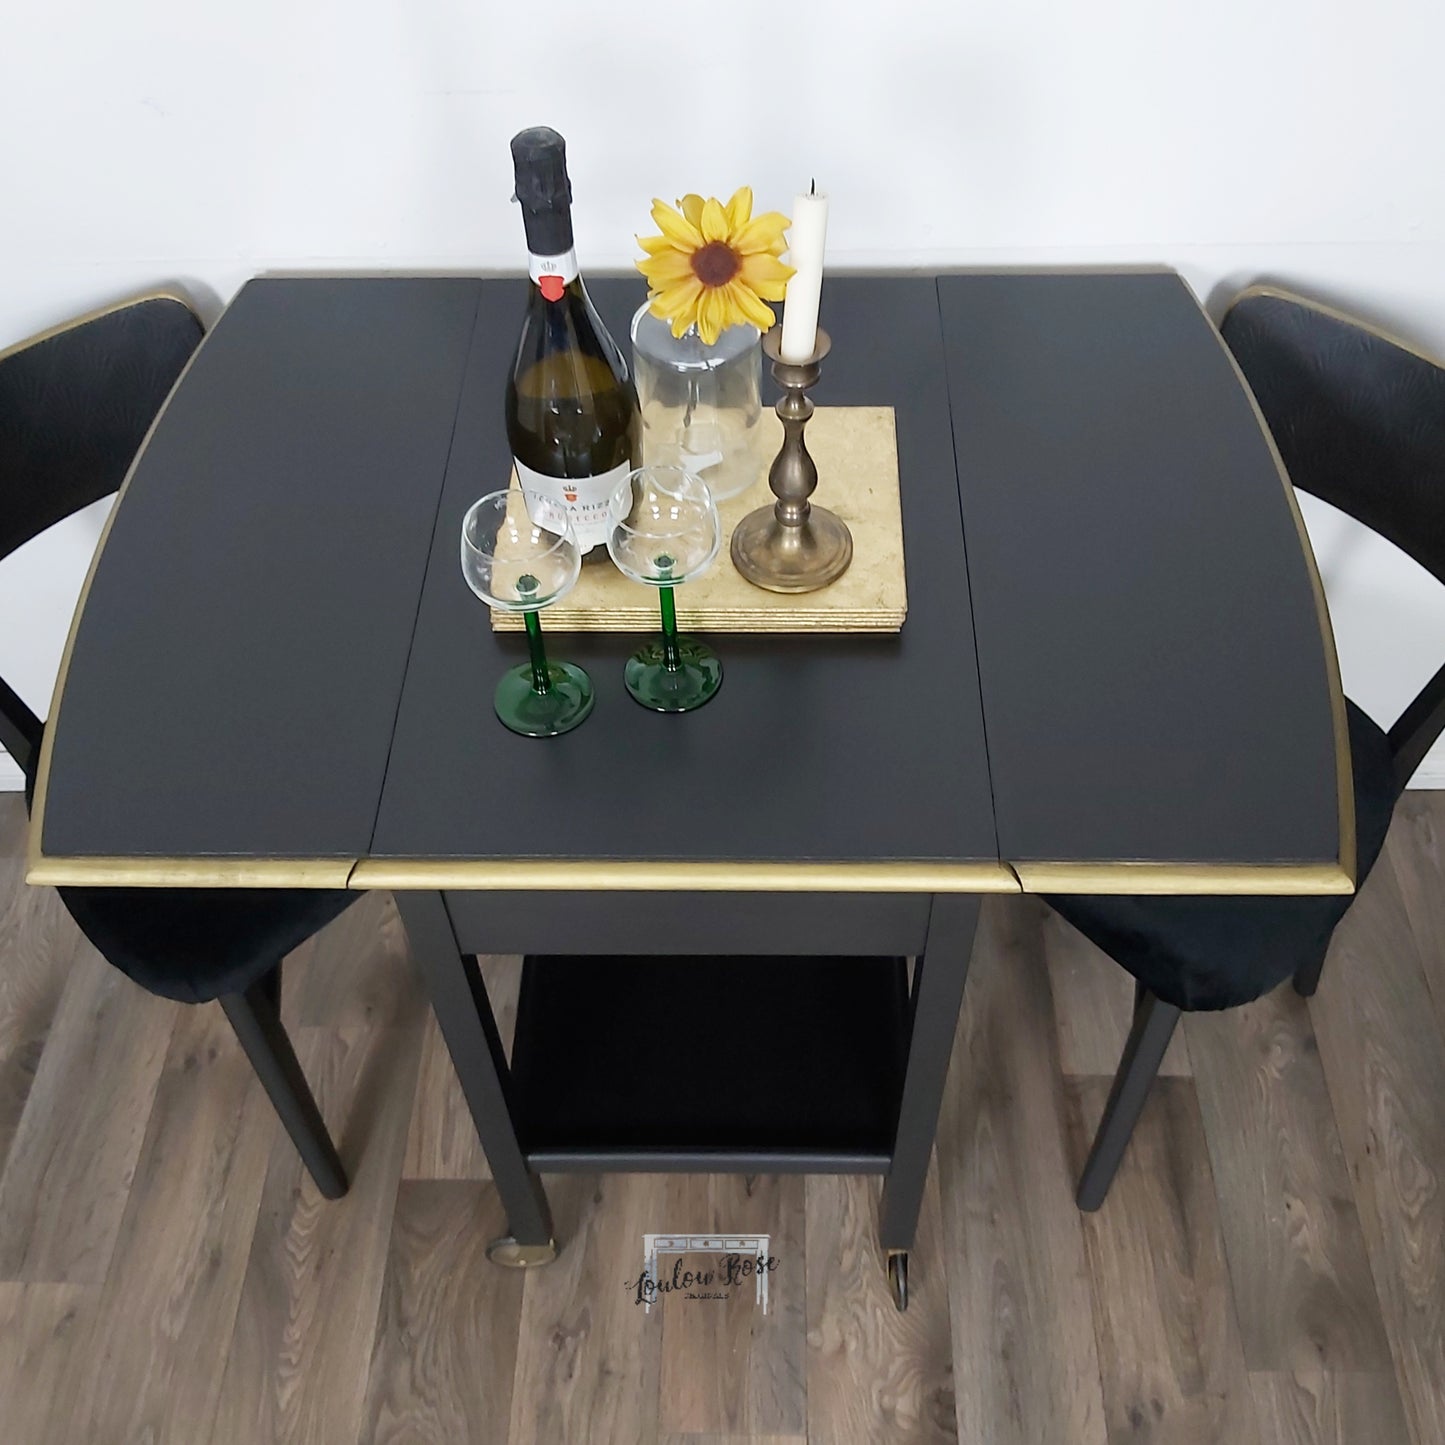 Trolley Table and Chairs in Black and Gold, Drinks Trolley Dining Set